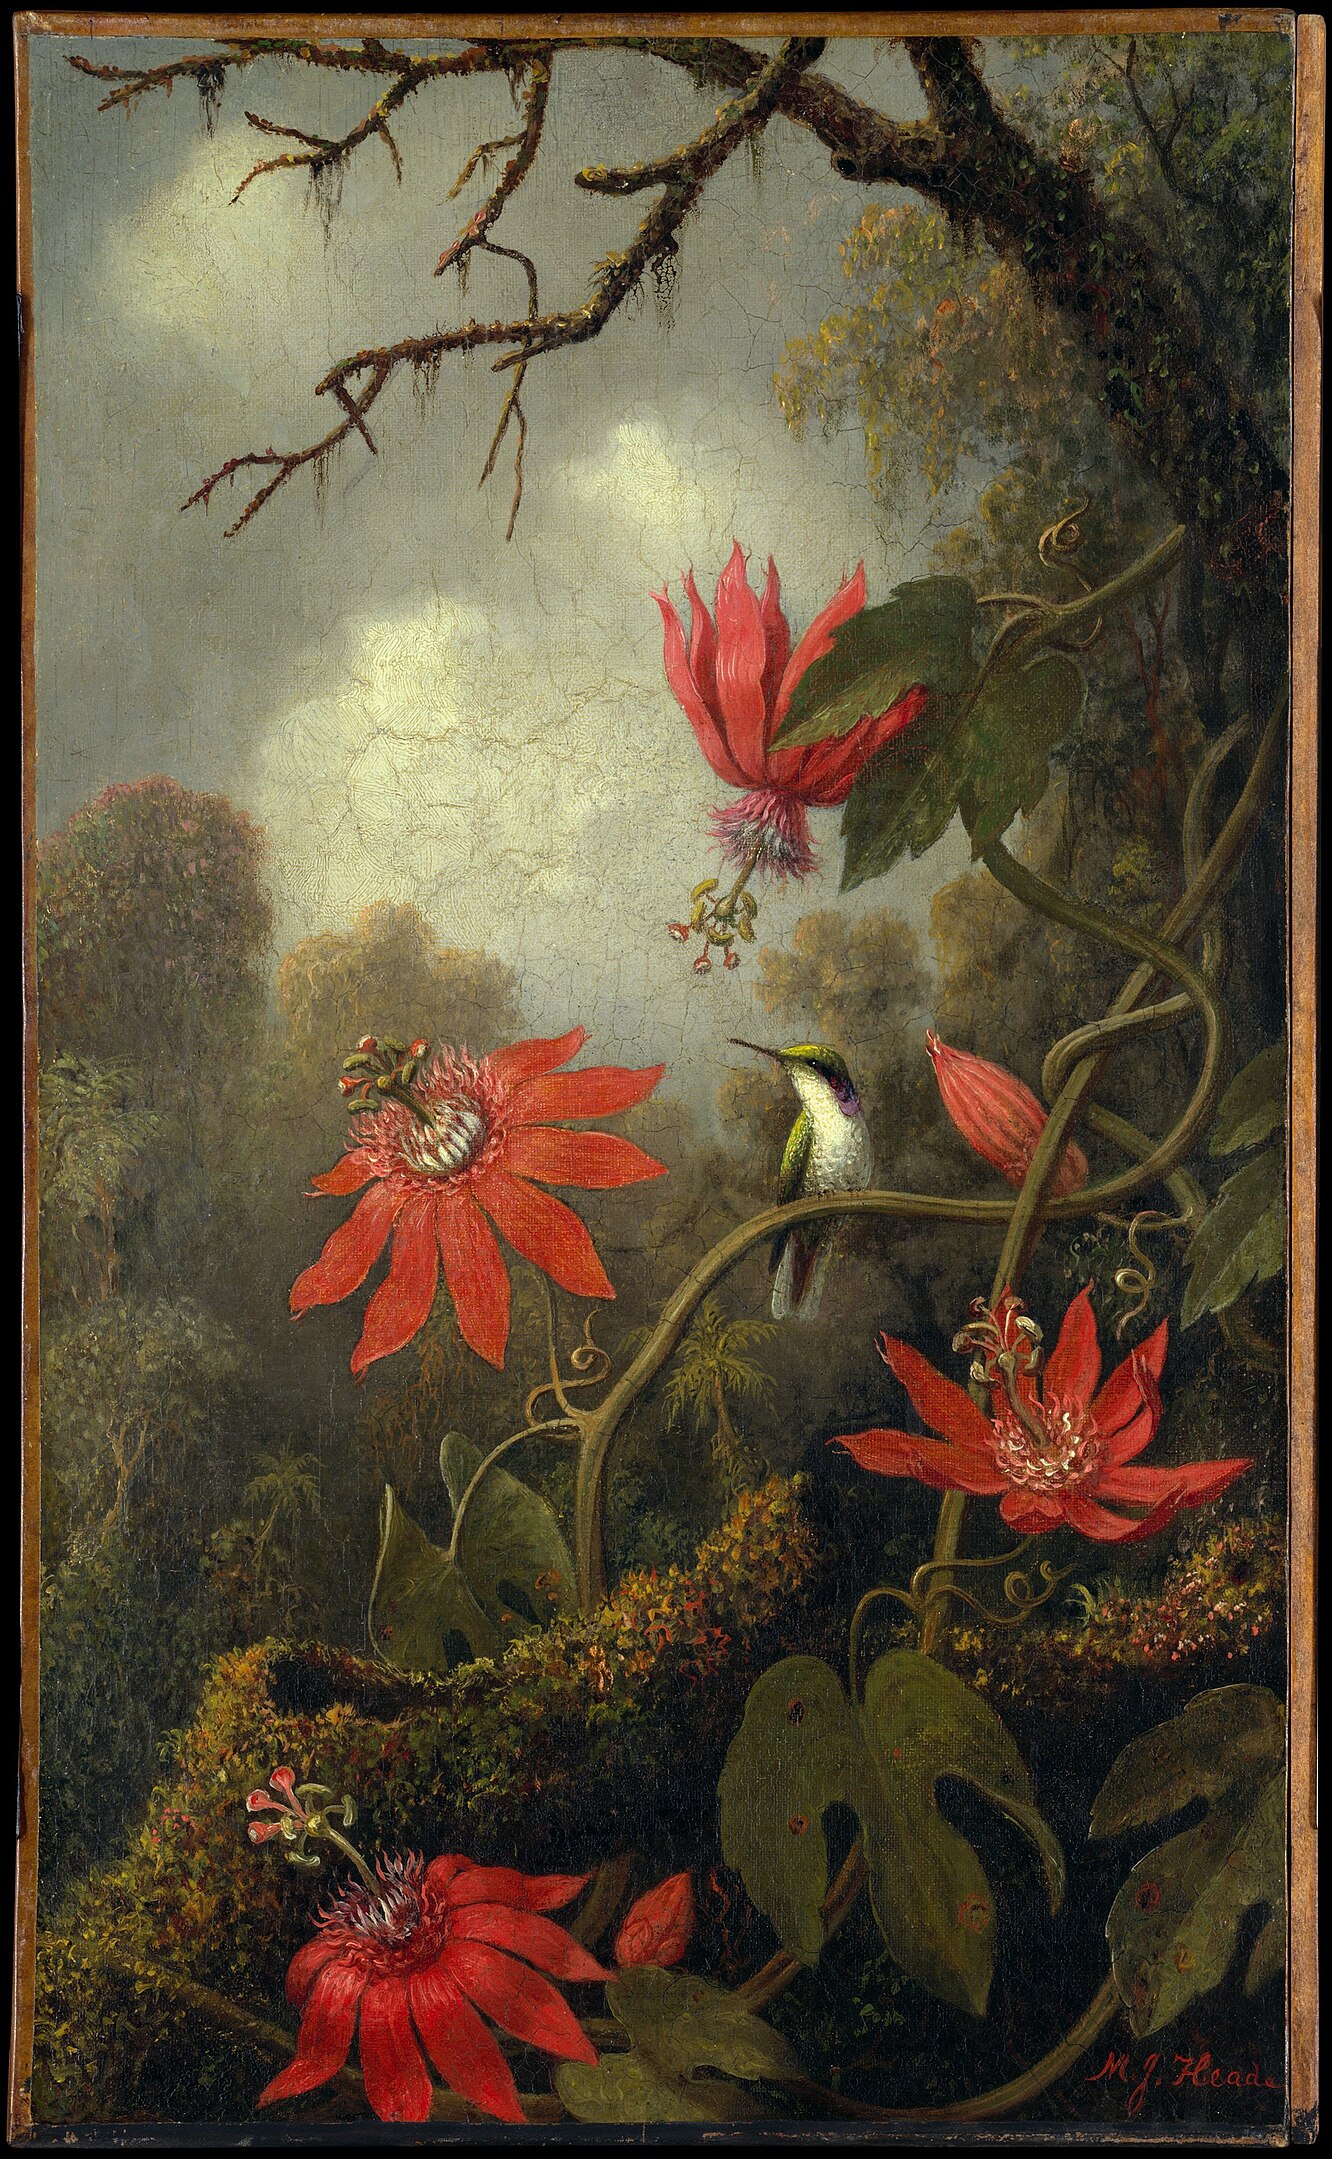 A hummingbird perched on a vine entangled by passionflowers in a forest